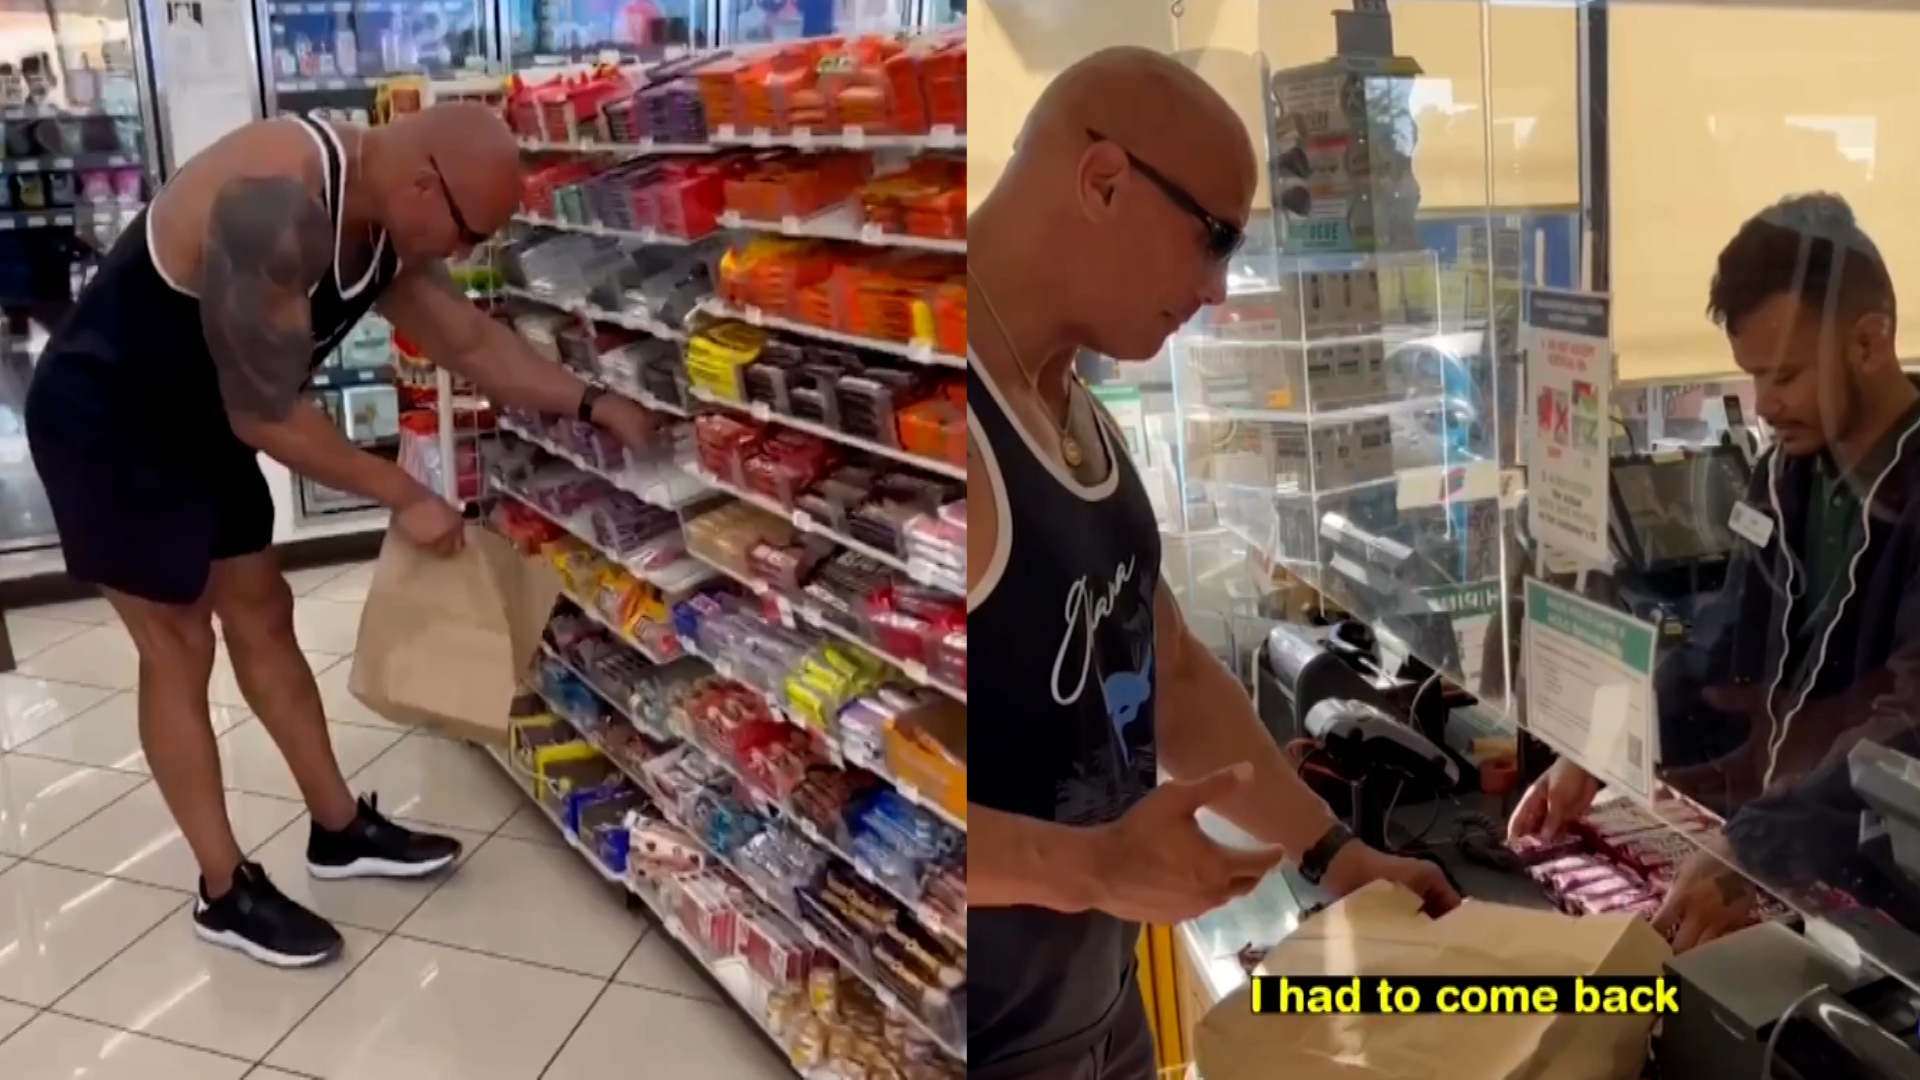 Dwayne 'the rock' Johnson buys every single Snickers bar at Hawaii 7-Eleven to "right the wrongs" of his childhood